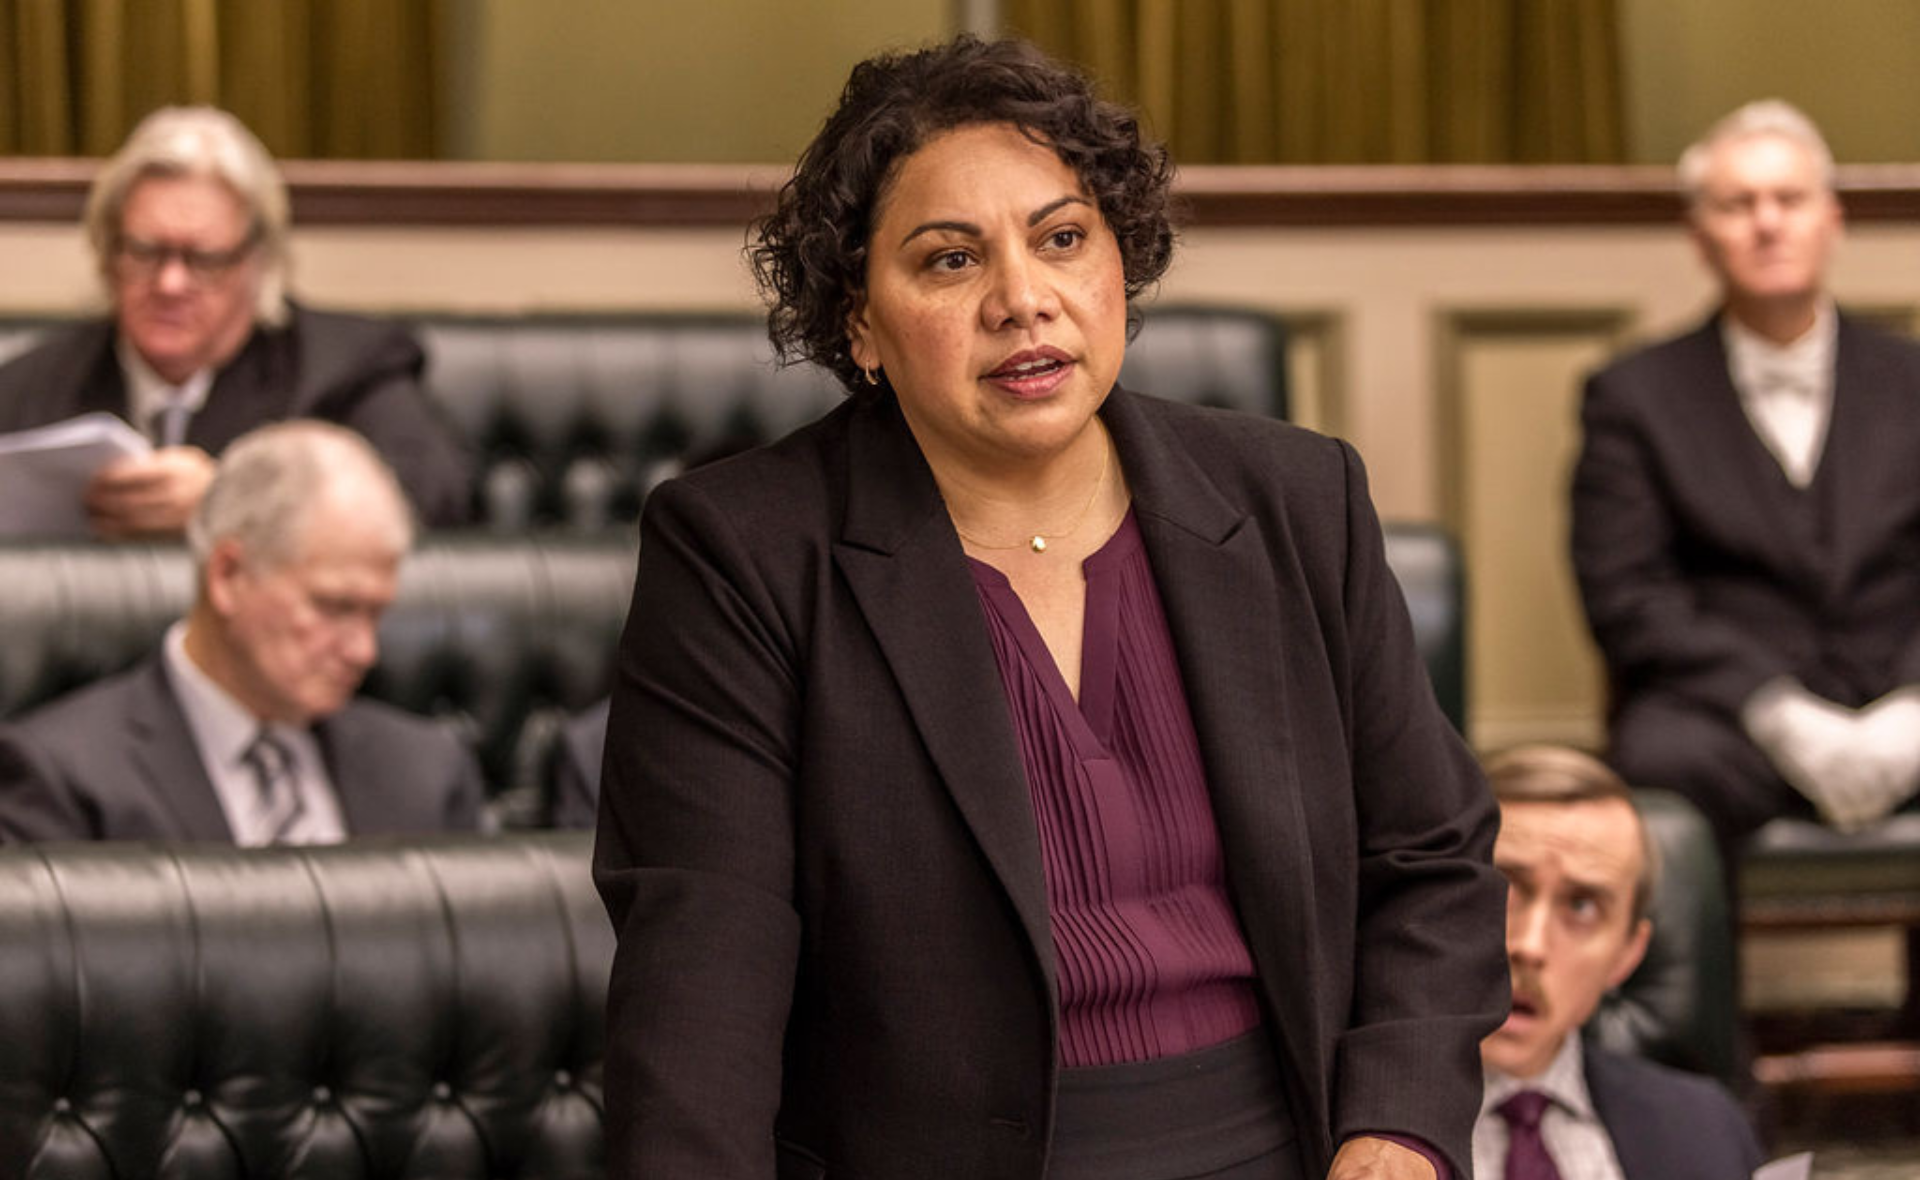 Deborah Mailman reveals the character she identified with and the one she was “grateful” to play